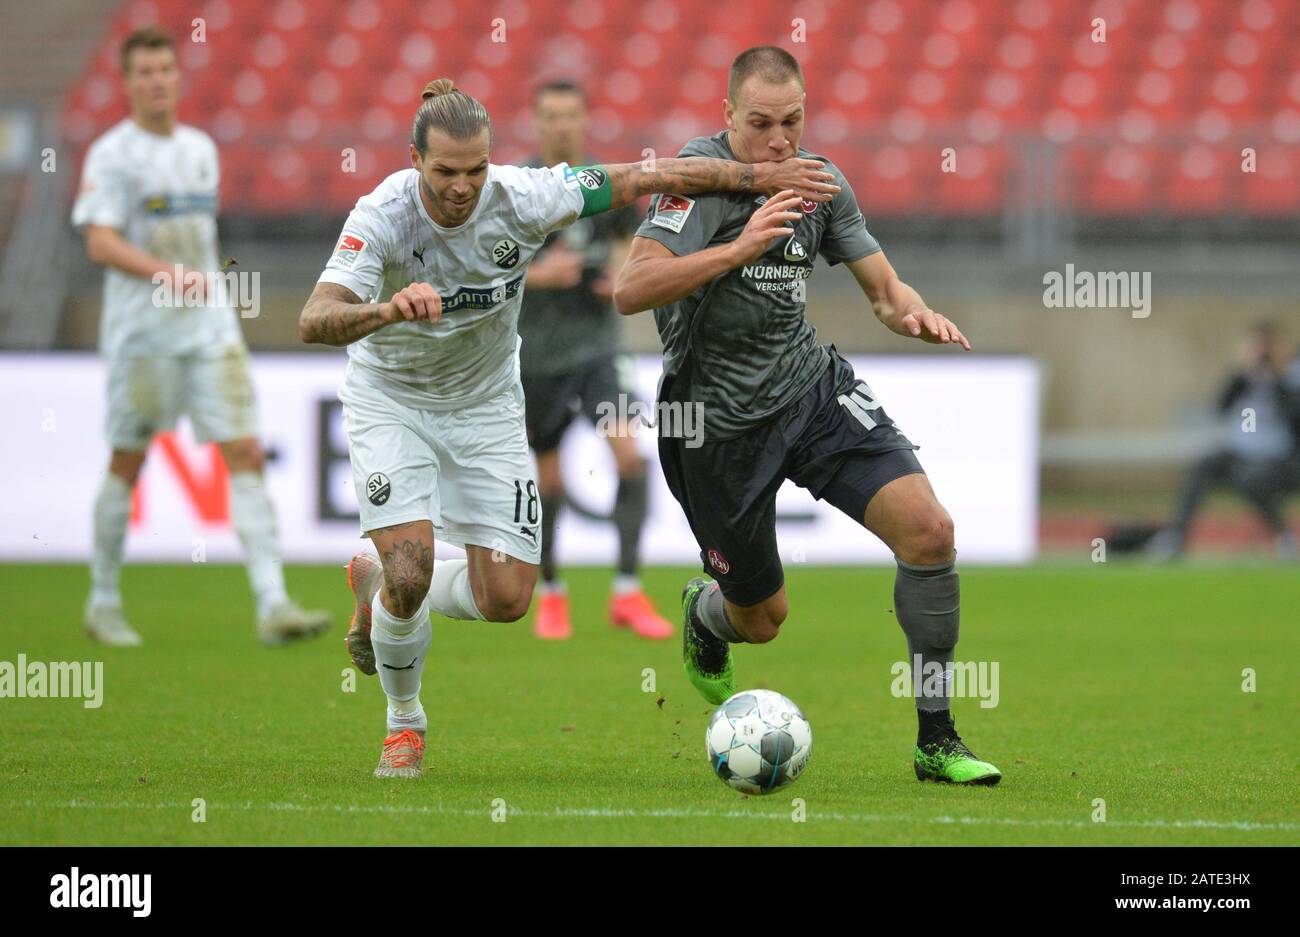 Nuremberg, Germany. 02nd Feb, 2020. Football: 2nd Bundesliga, 1st FC Nürnberg - SV Sandhausen, 20th matchday at the Max Morlock Stadium. Michael Frey from Nuremberg plays against Dennis Diekmeier (l) from Sandhausen. Credit: Timm Schamberger/dpa - IMPORTANT NOTE: In accordance with the regulations of the DFL Deutsche Fußball Liga and the DFB Deutscher Fußball-Bund, it is prohibited to exploit or have exploited in the stadium and/or from the game taken photographs in the form of sequence images and/or video-like photo series./dpa/Alamy Live News Stock Photo